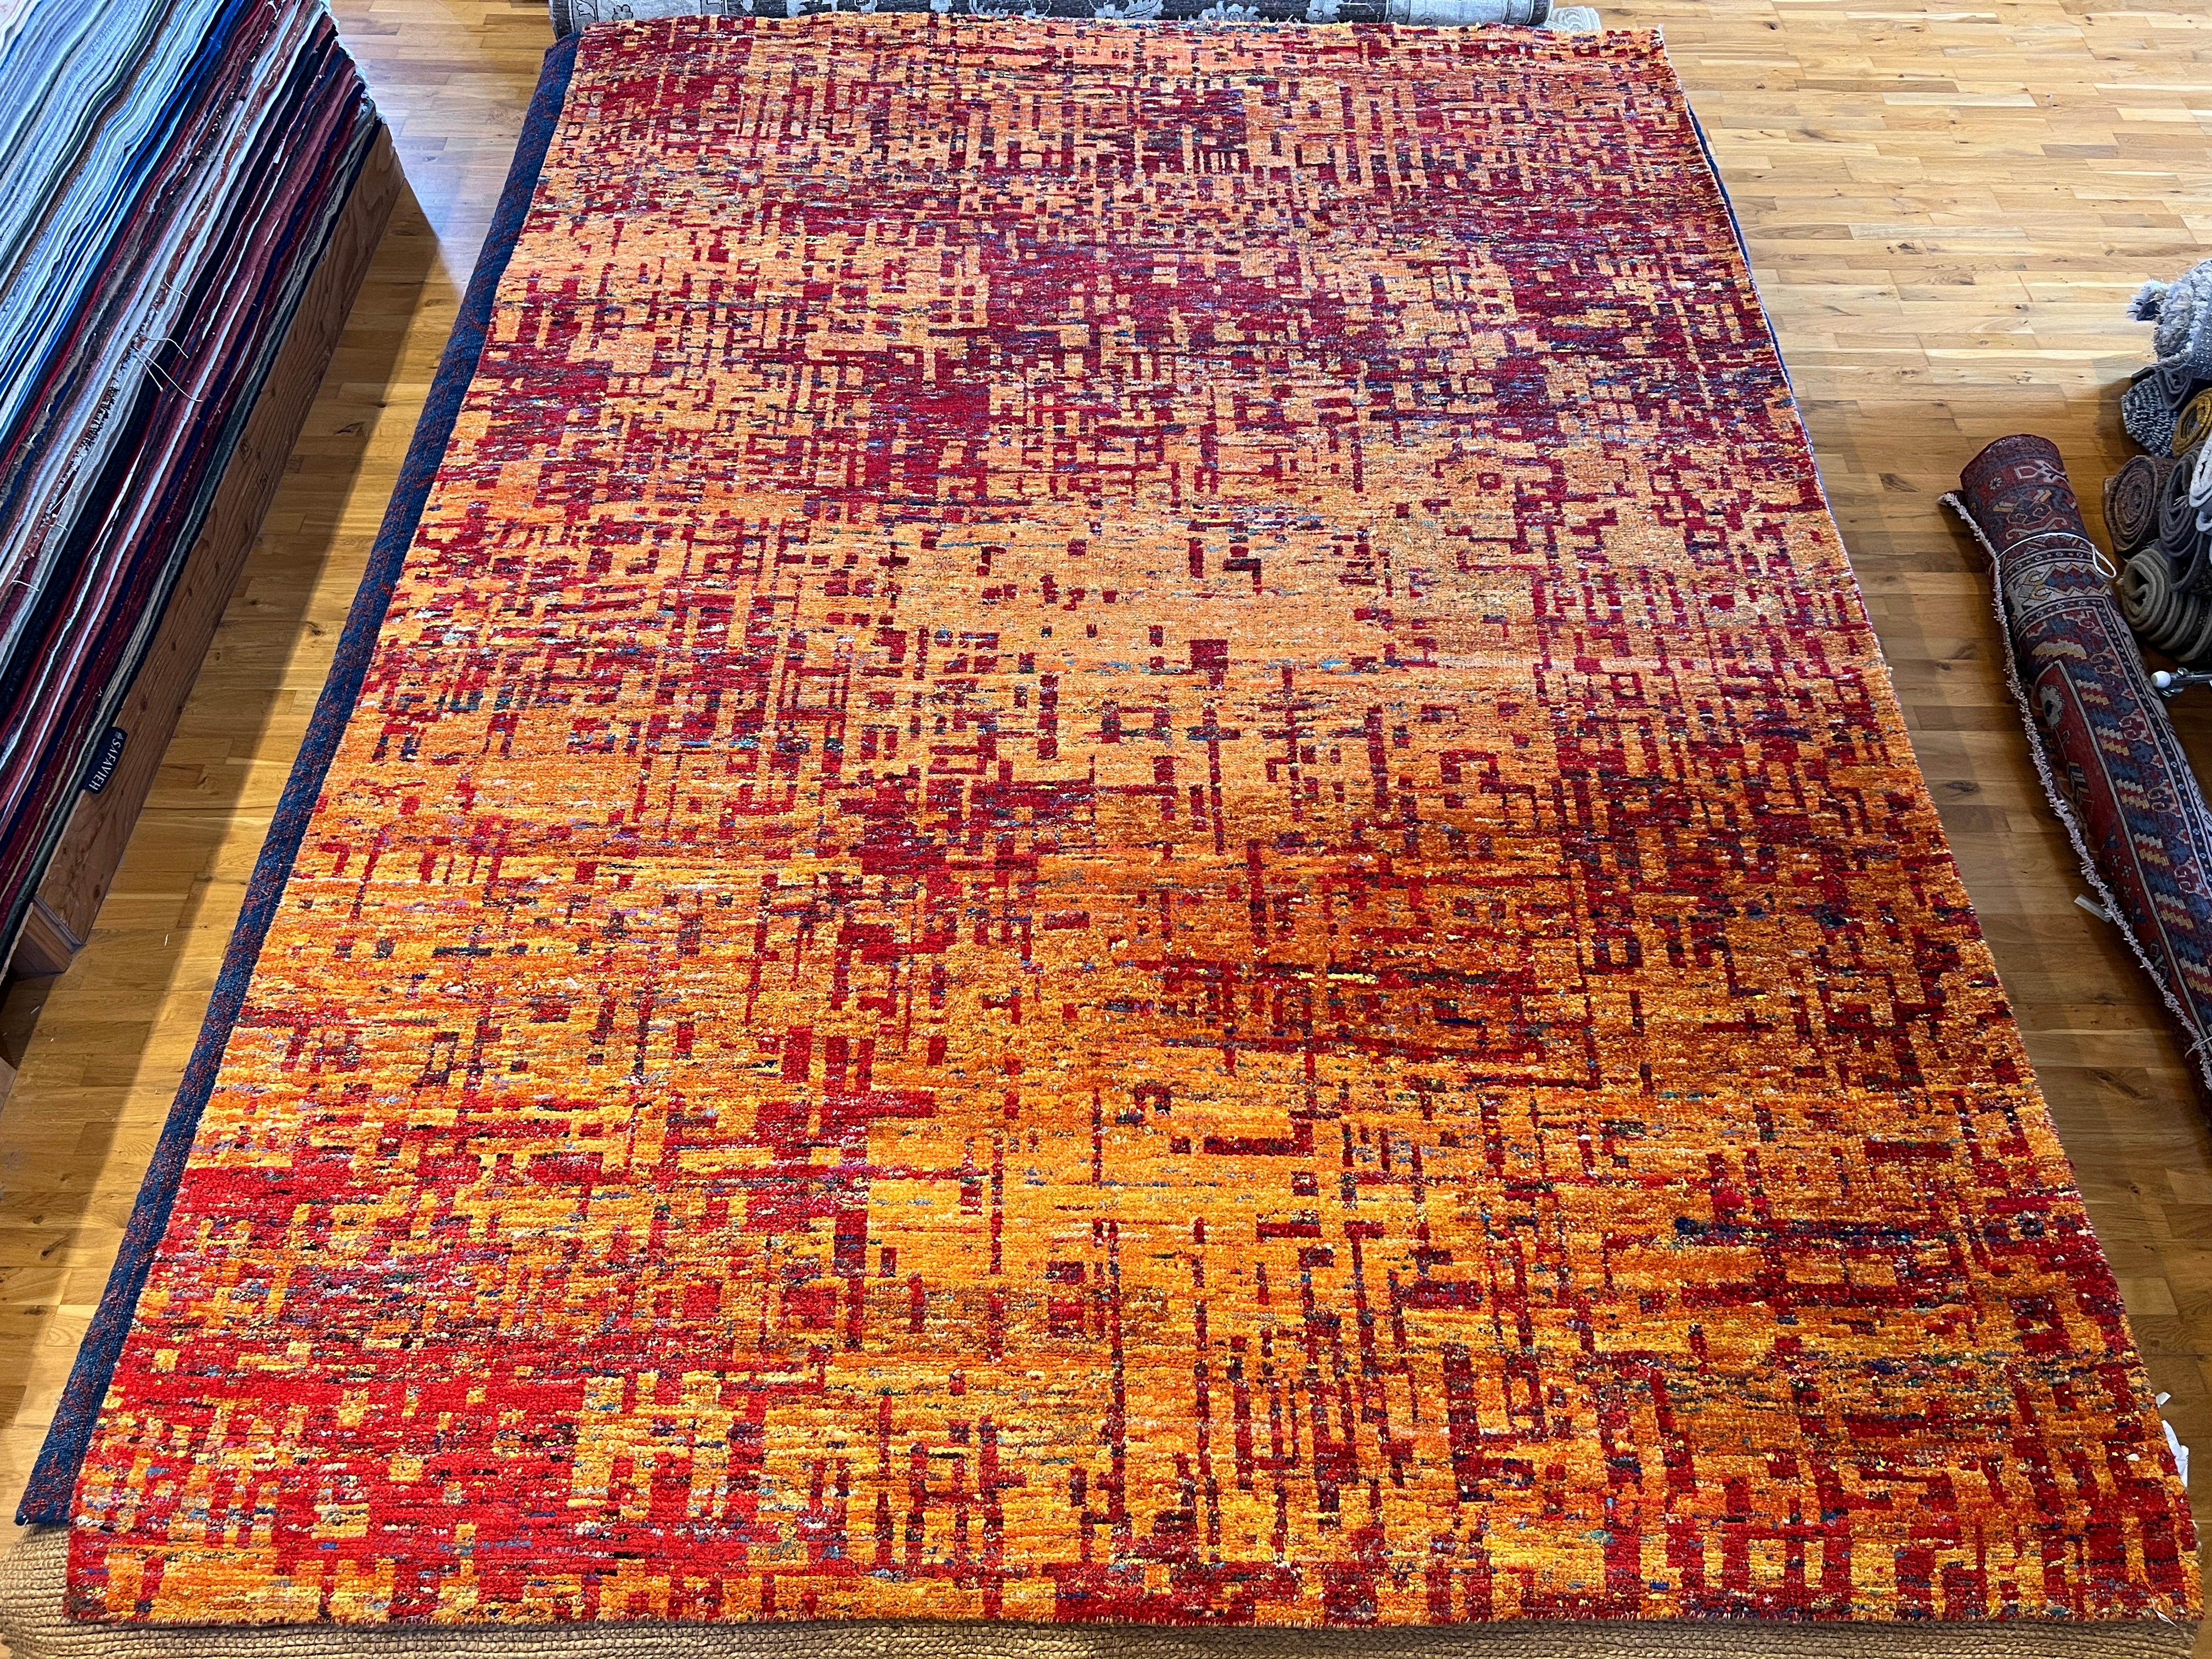 Indian 9'x12' Abstract Grunge Design Rug in Reds and Oranges Hue  For Sale